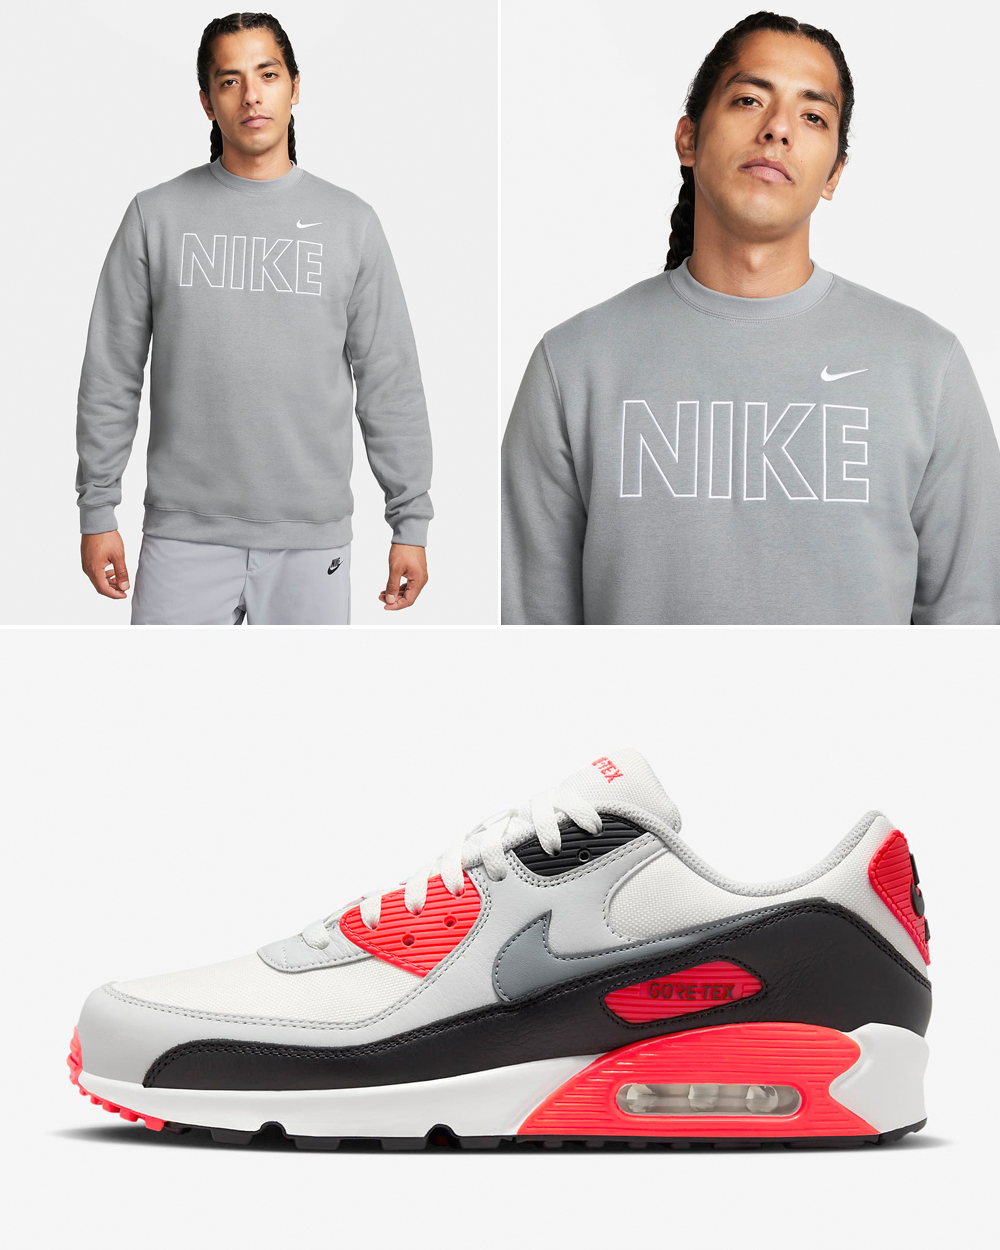 Nike-Air-Max-90-Gore-Tex-Infrared-Sweatshirt-Matching-Outfit